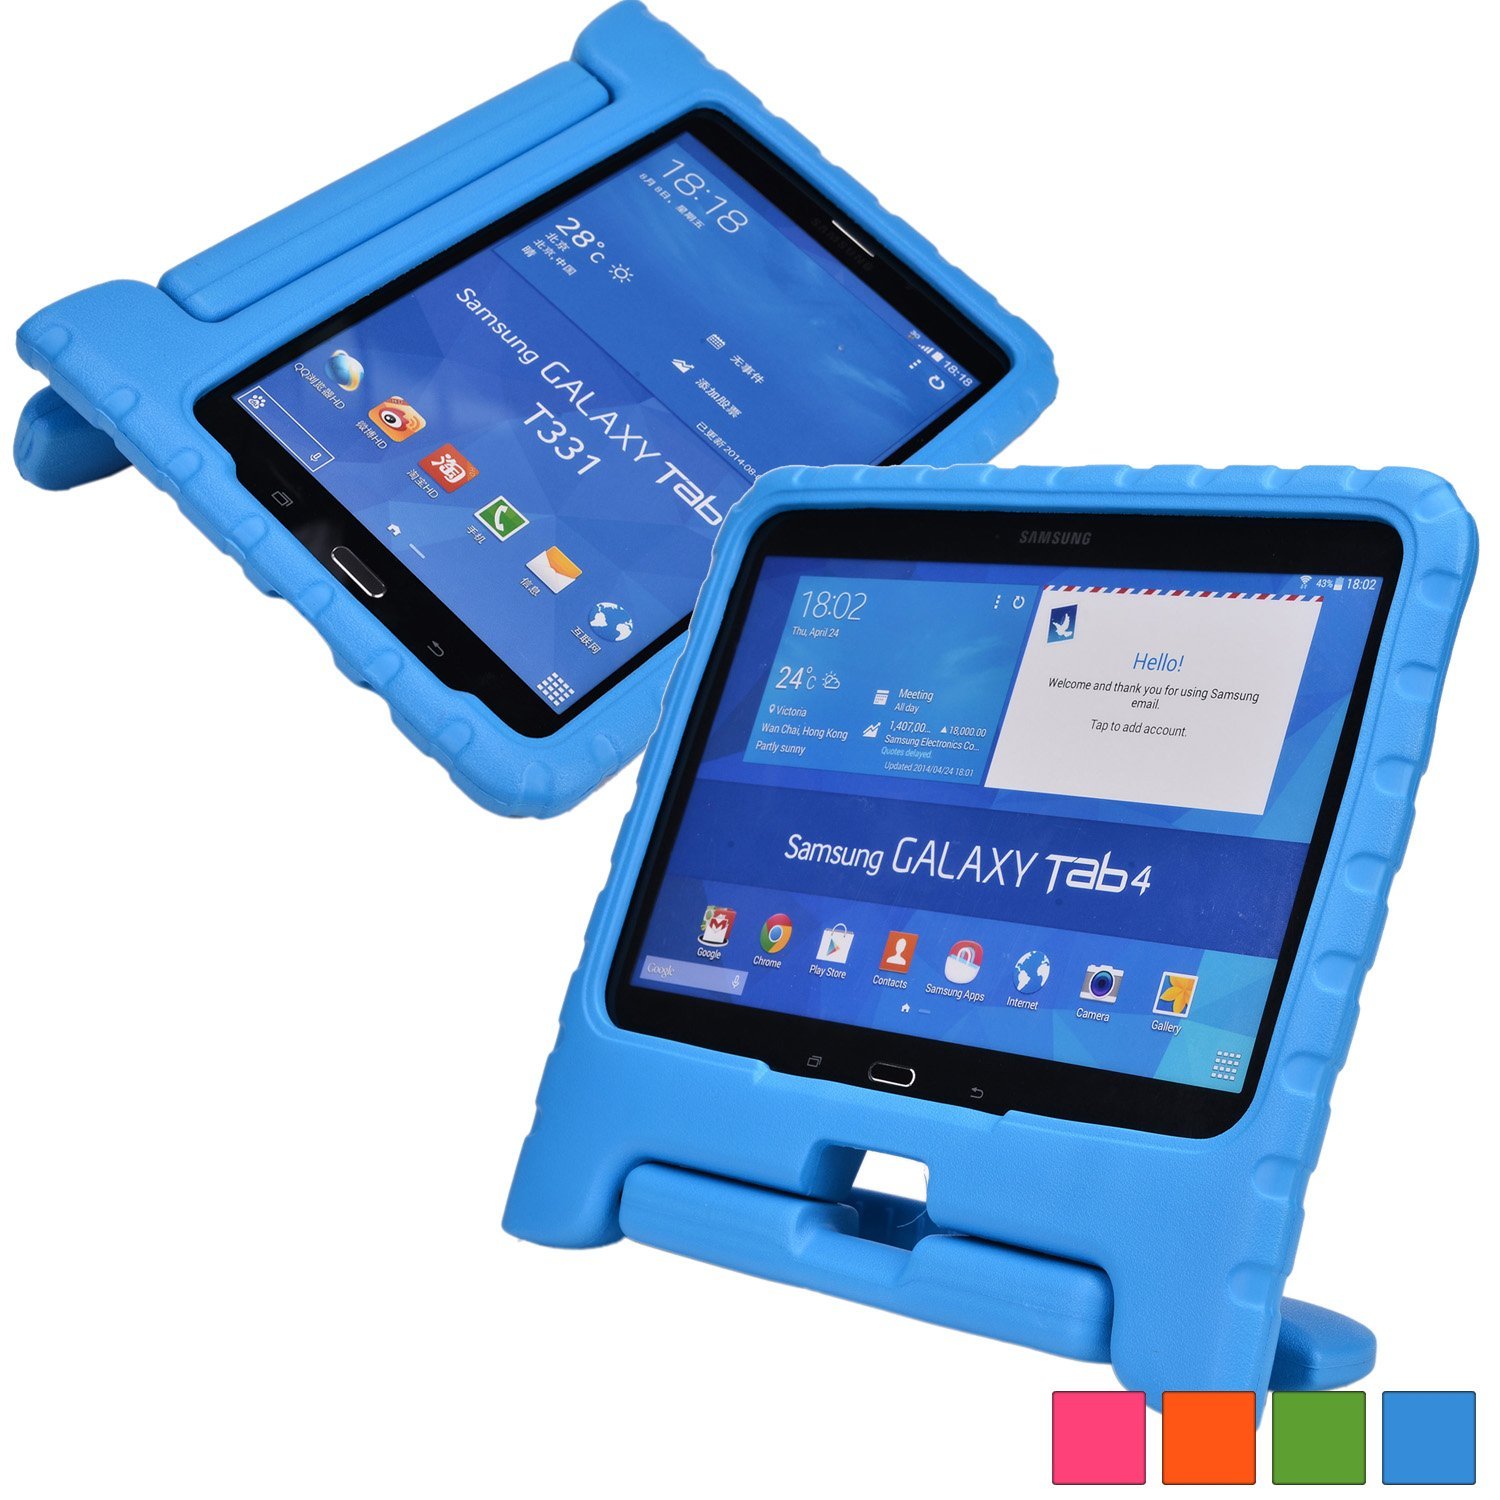 Cooper Cases(TM) Dynamo Samsung Galaxy Tab E 9.6 Kids Case in Blue (Lightweight, Shock-Absorbing, Child-Safe EVA Foam, Built-in Handle and Viewing Stand)